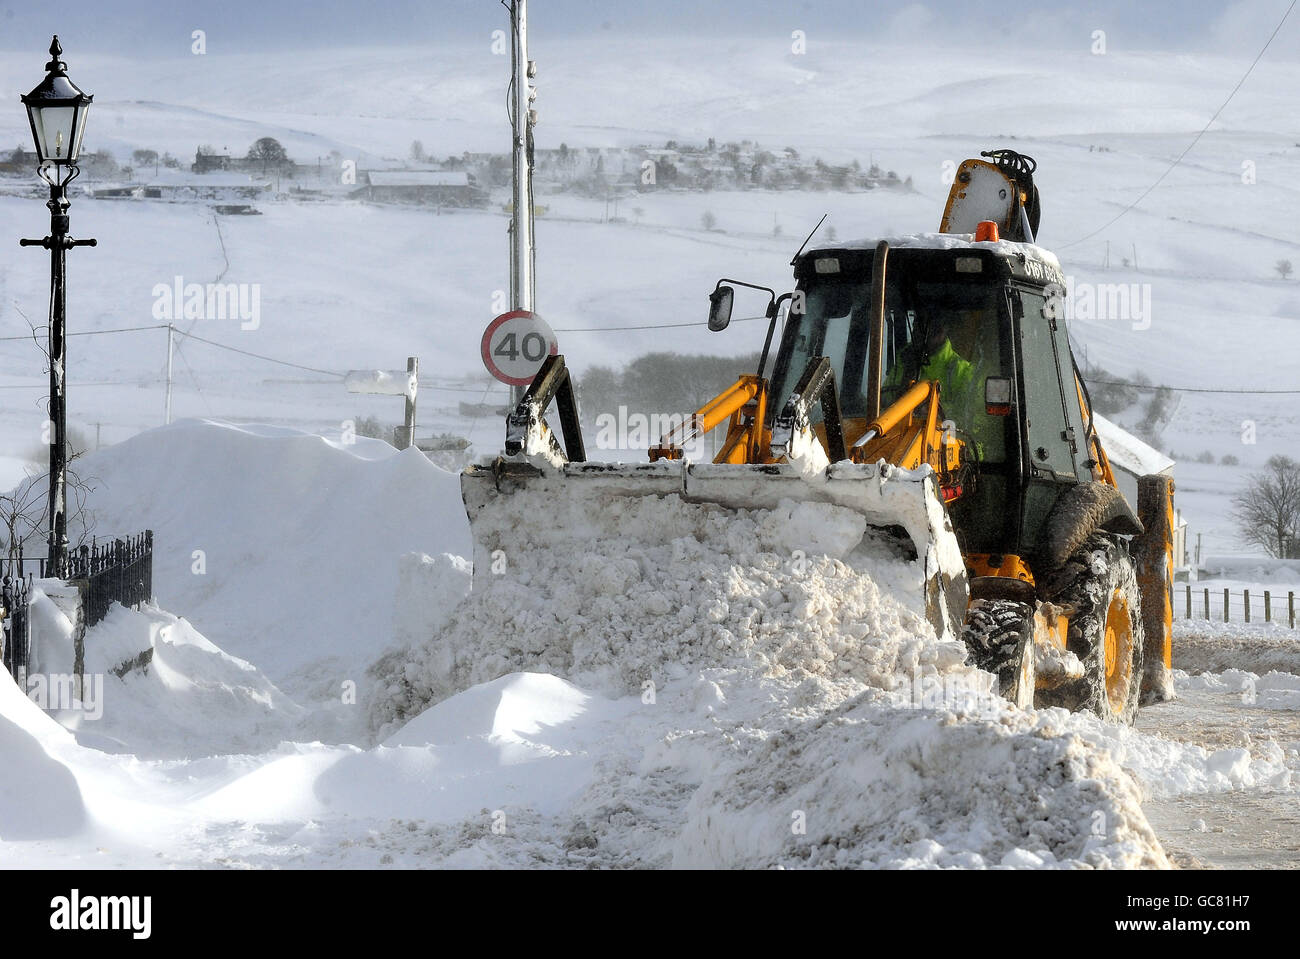 A snow plough removes deep snowdrifts near Oldham as heavy snowfalls continue across most parts of the UK. Stock Photo